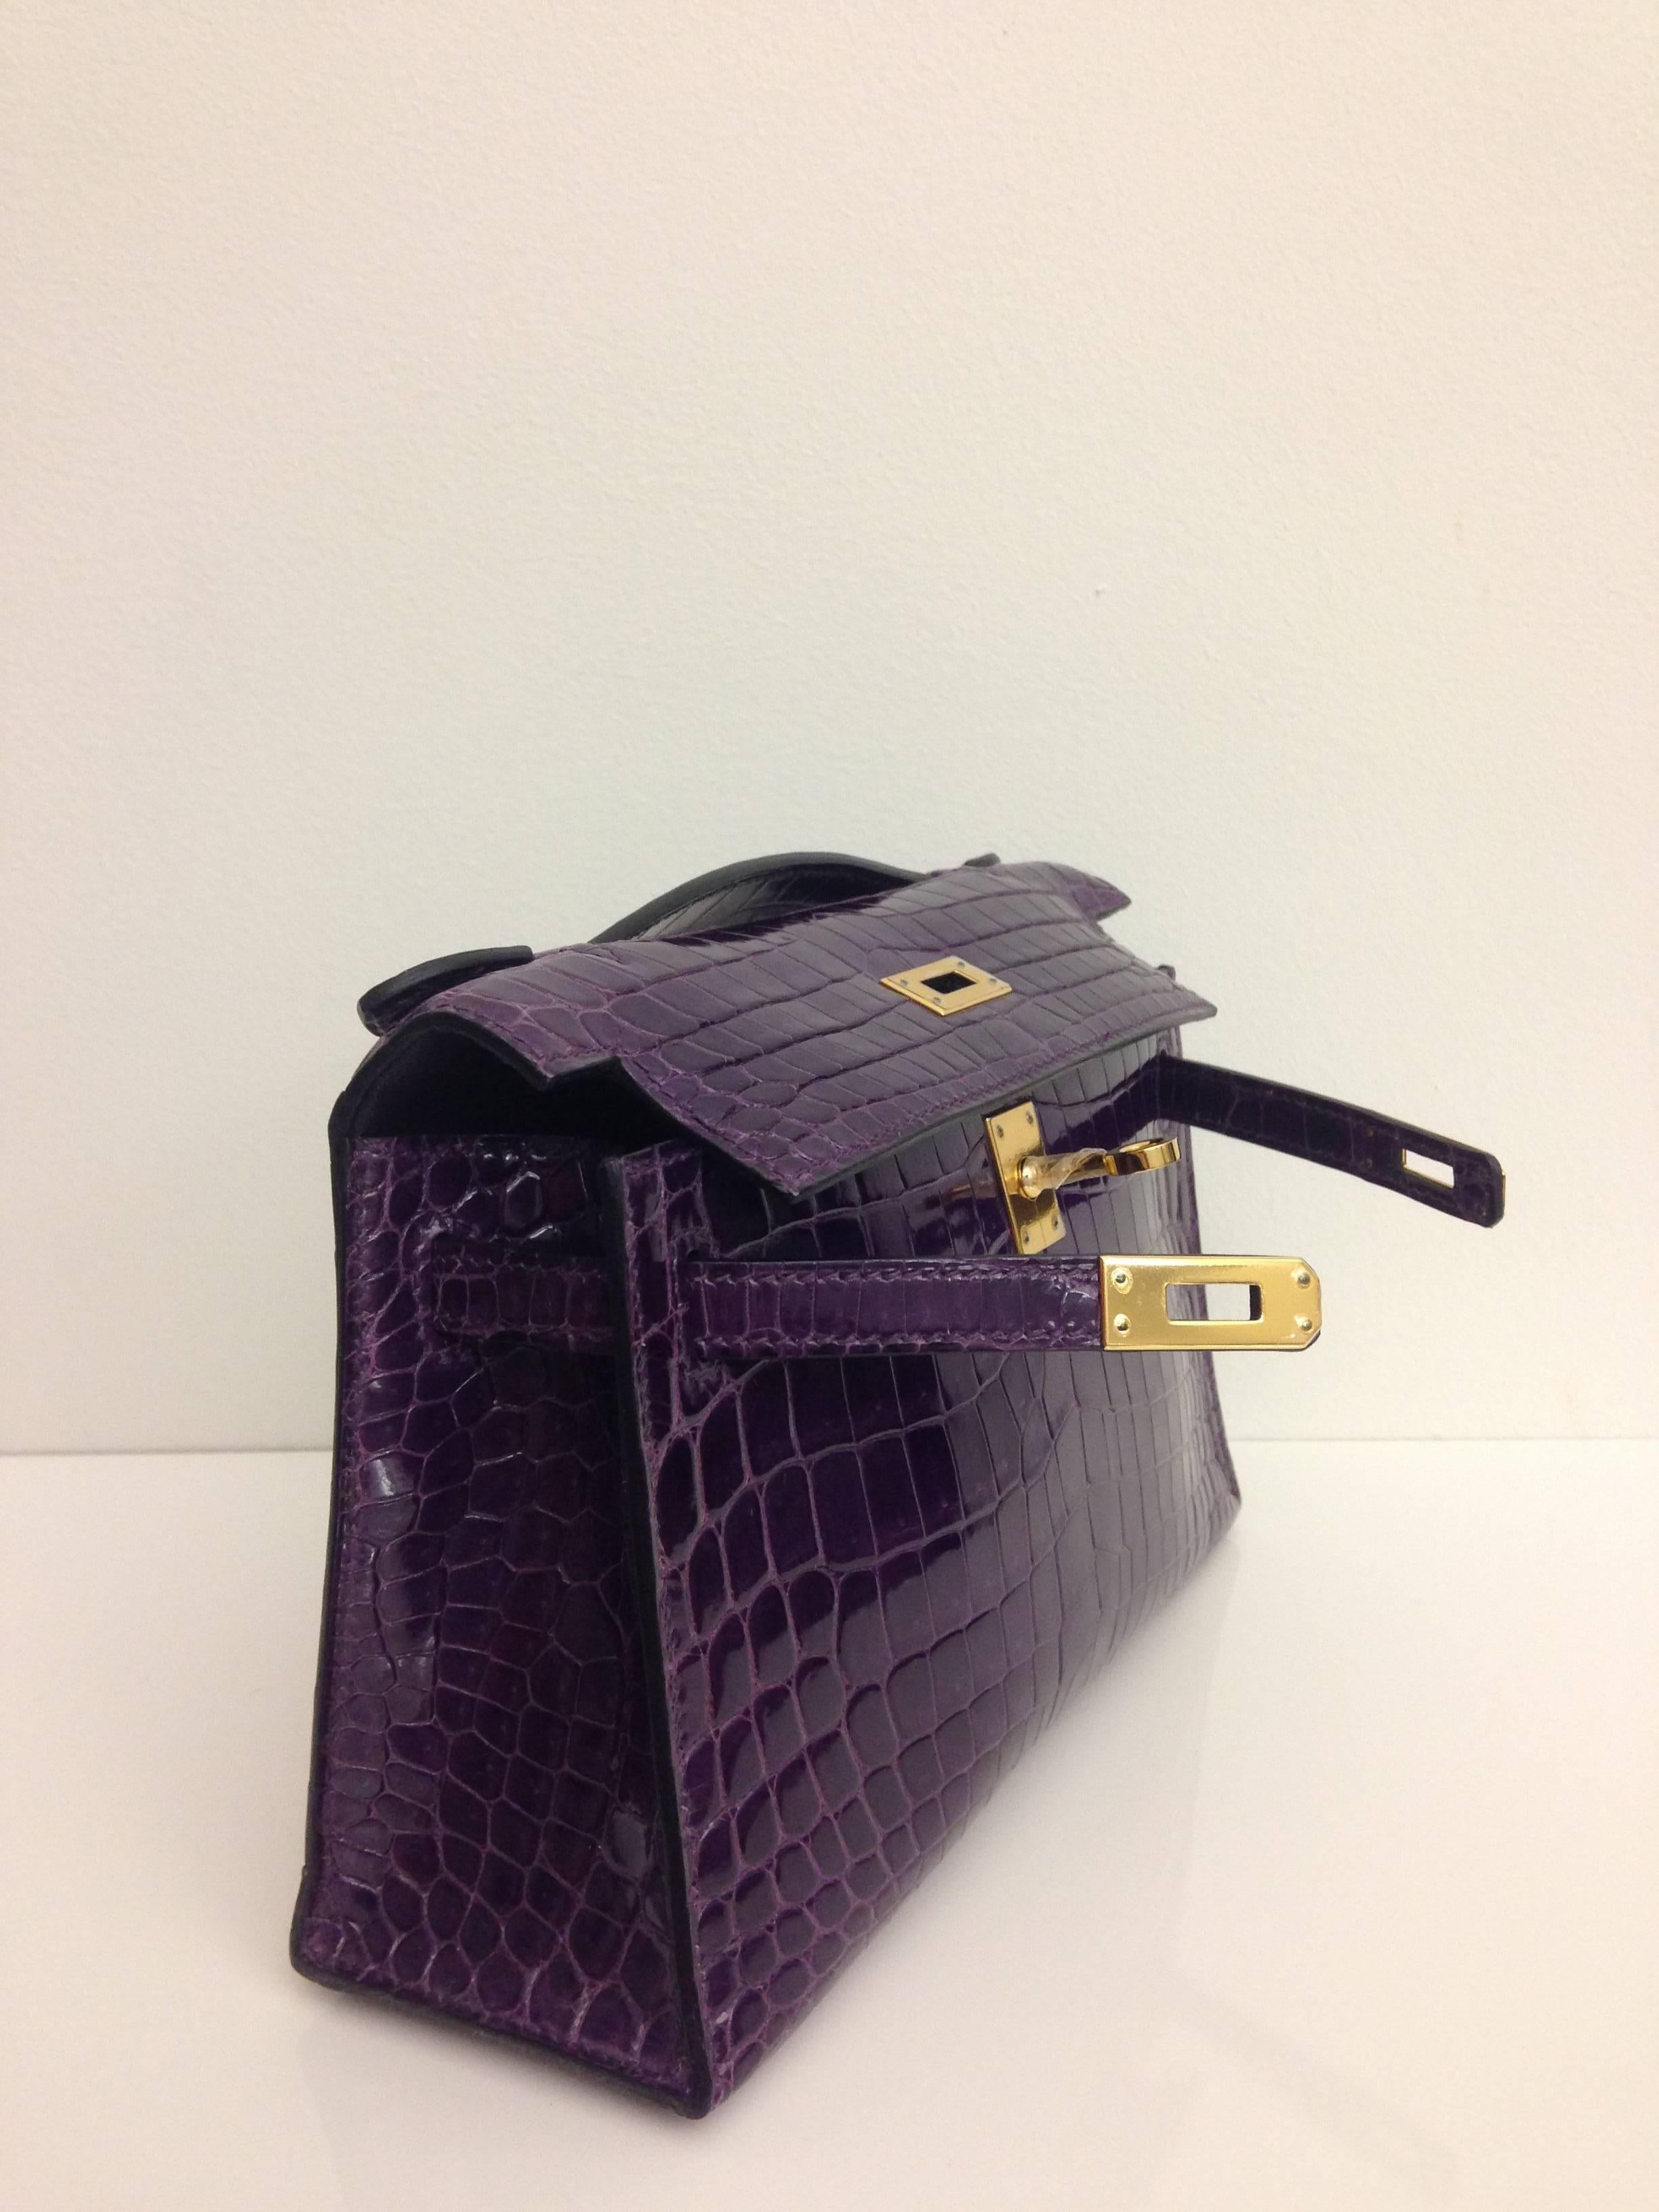 Hermes, Kelly Pochette bag, Colour Amethyste, Shiny Crocodile skin - Alligator, Gold Hardware.

This Bag comes with a box, dustbag and manual 